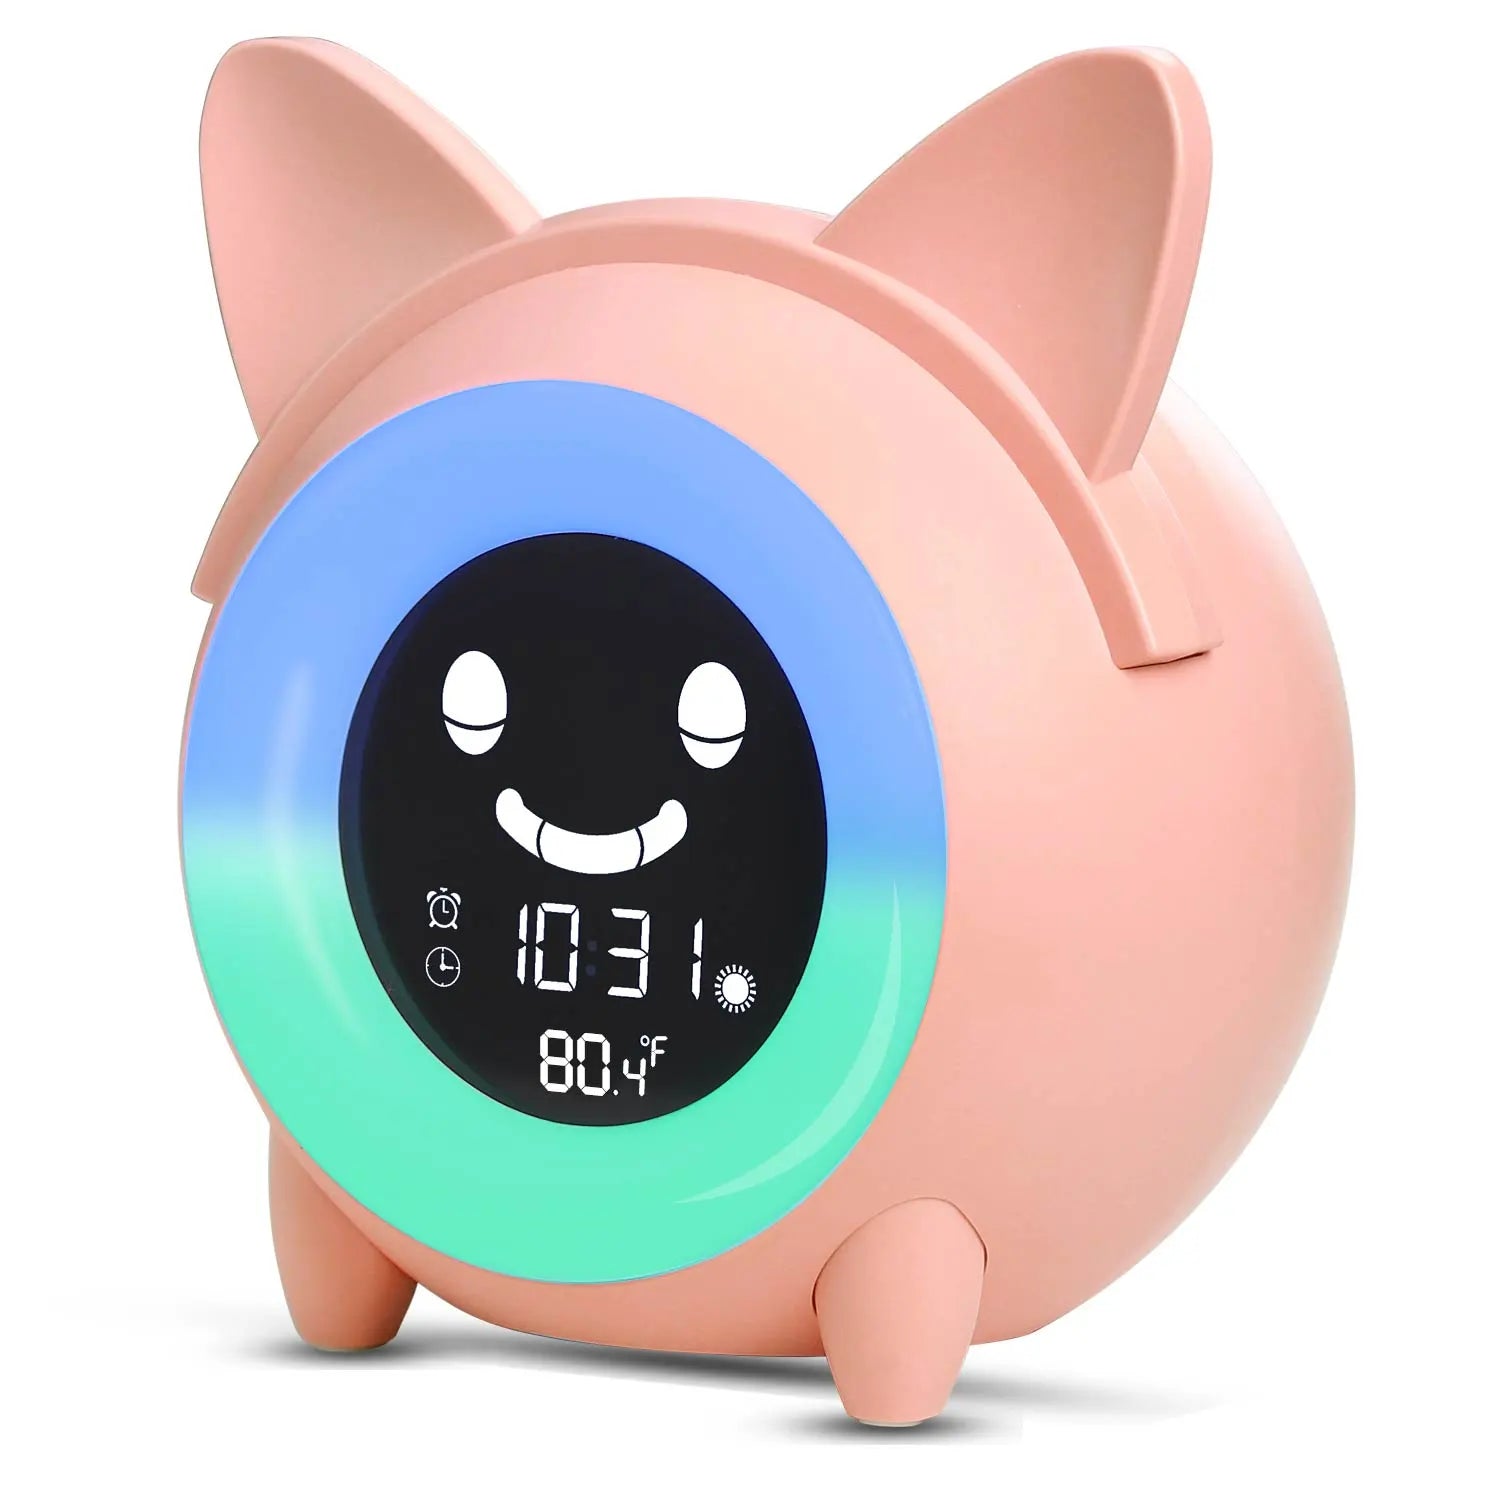 Child Alarm Clock with Cute Animal Design, Sleep Trainer, Digital Wake-Up, Colorful Night Light, Snooze, Temperature, NAP Timer - Perfect for Kids Pink Cat